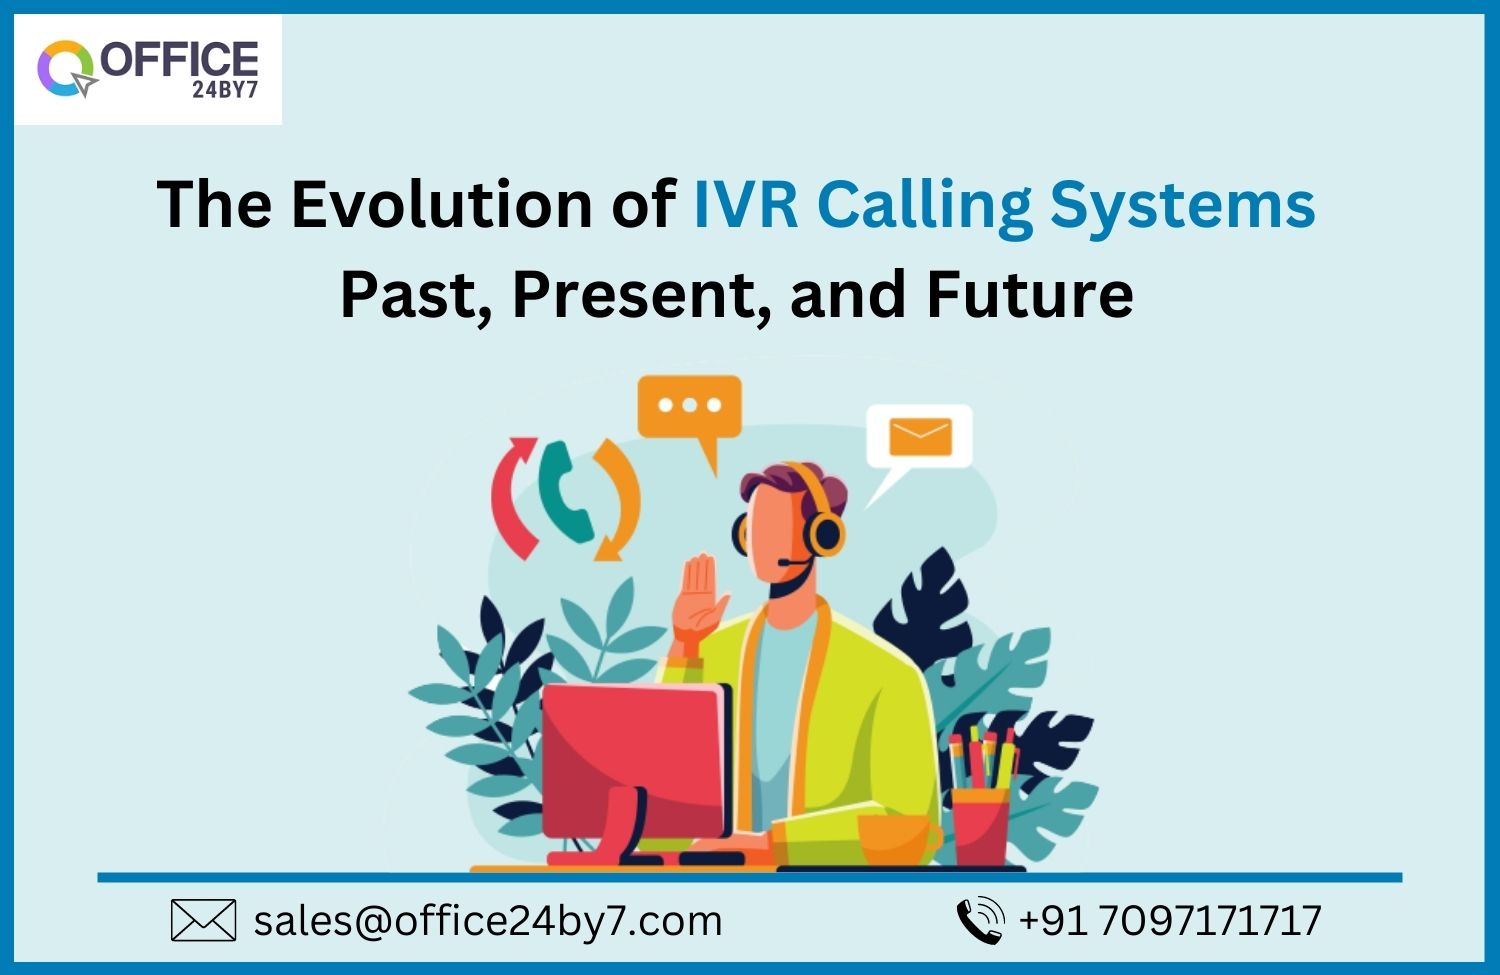 The Evolution of IVR Calling Systems